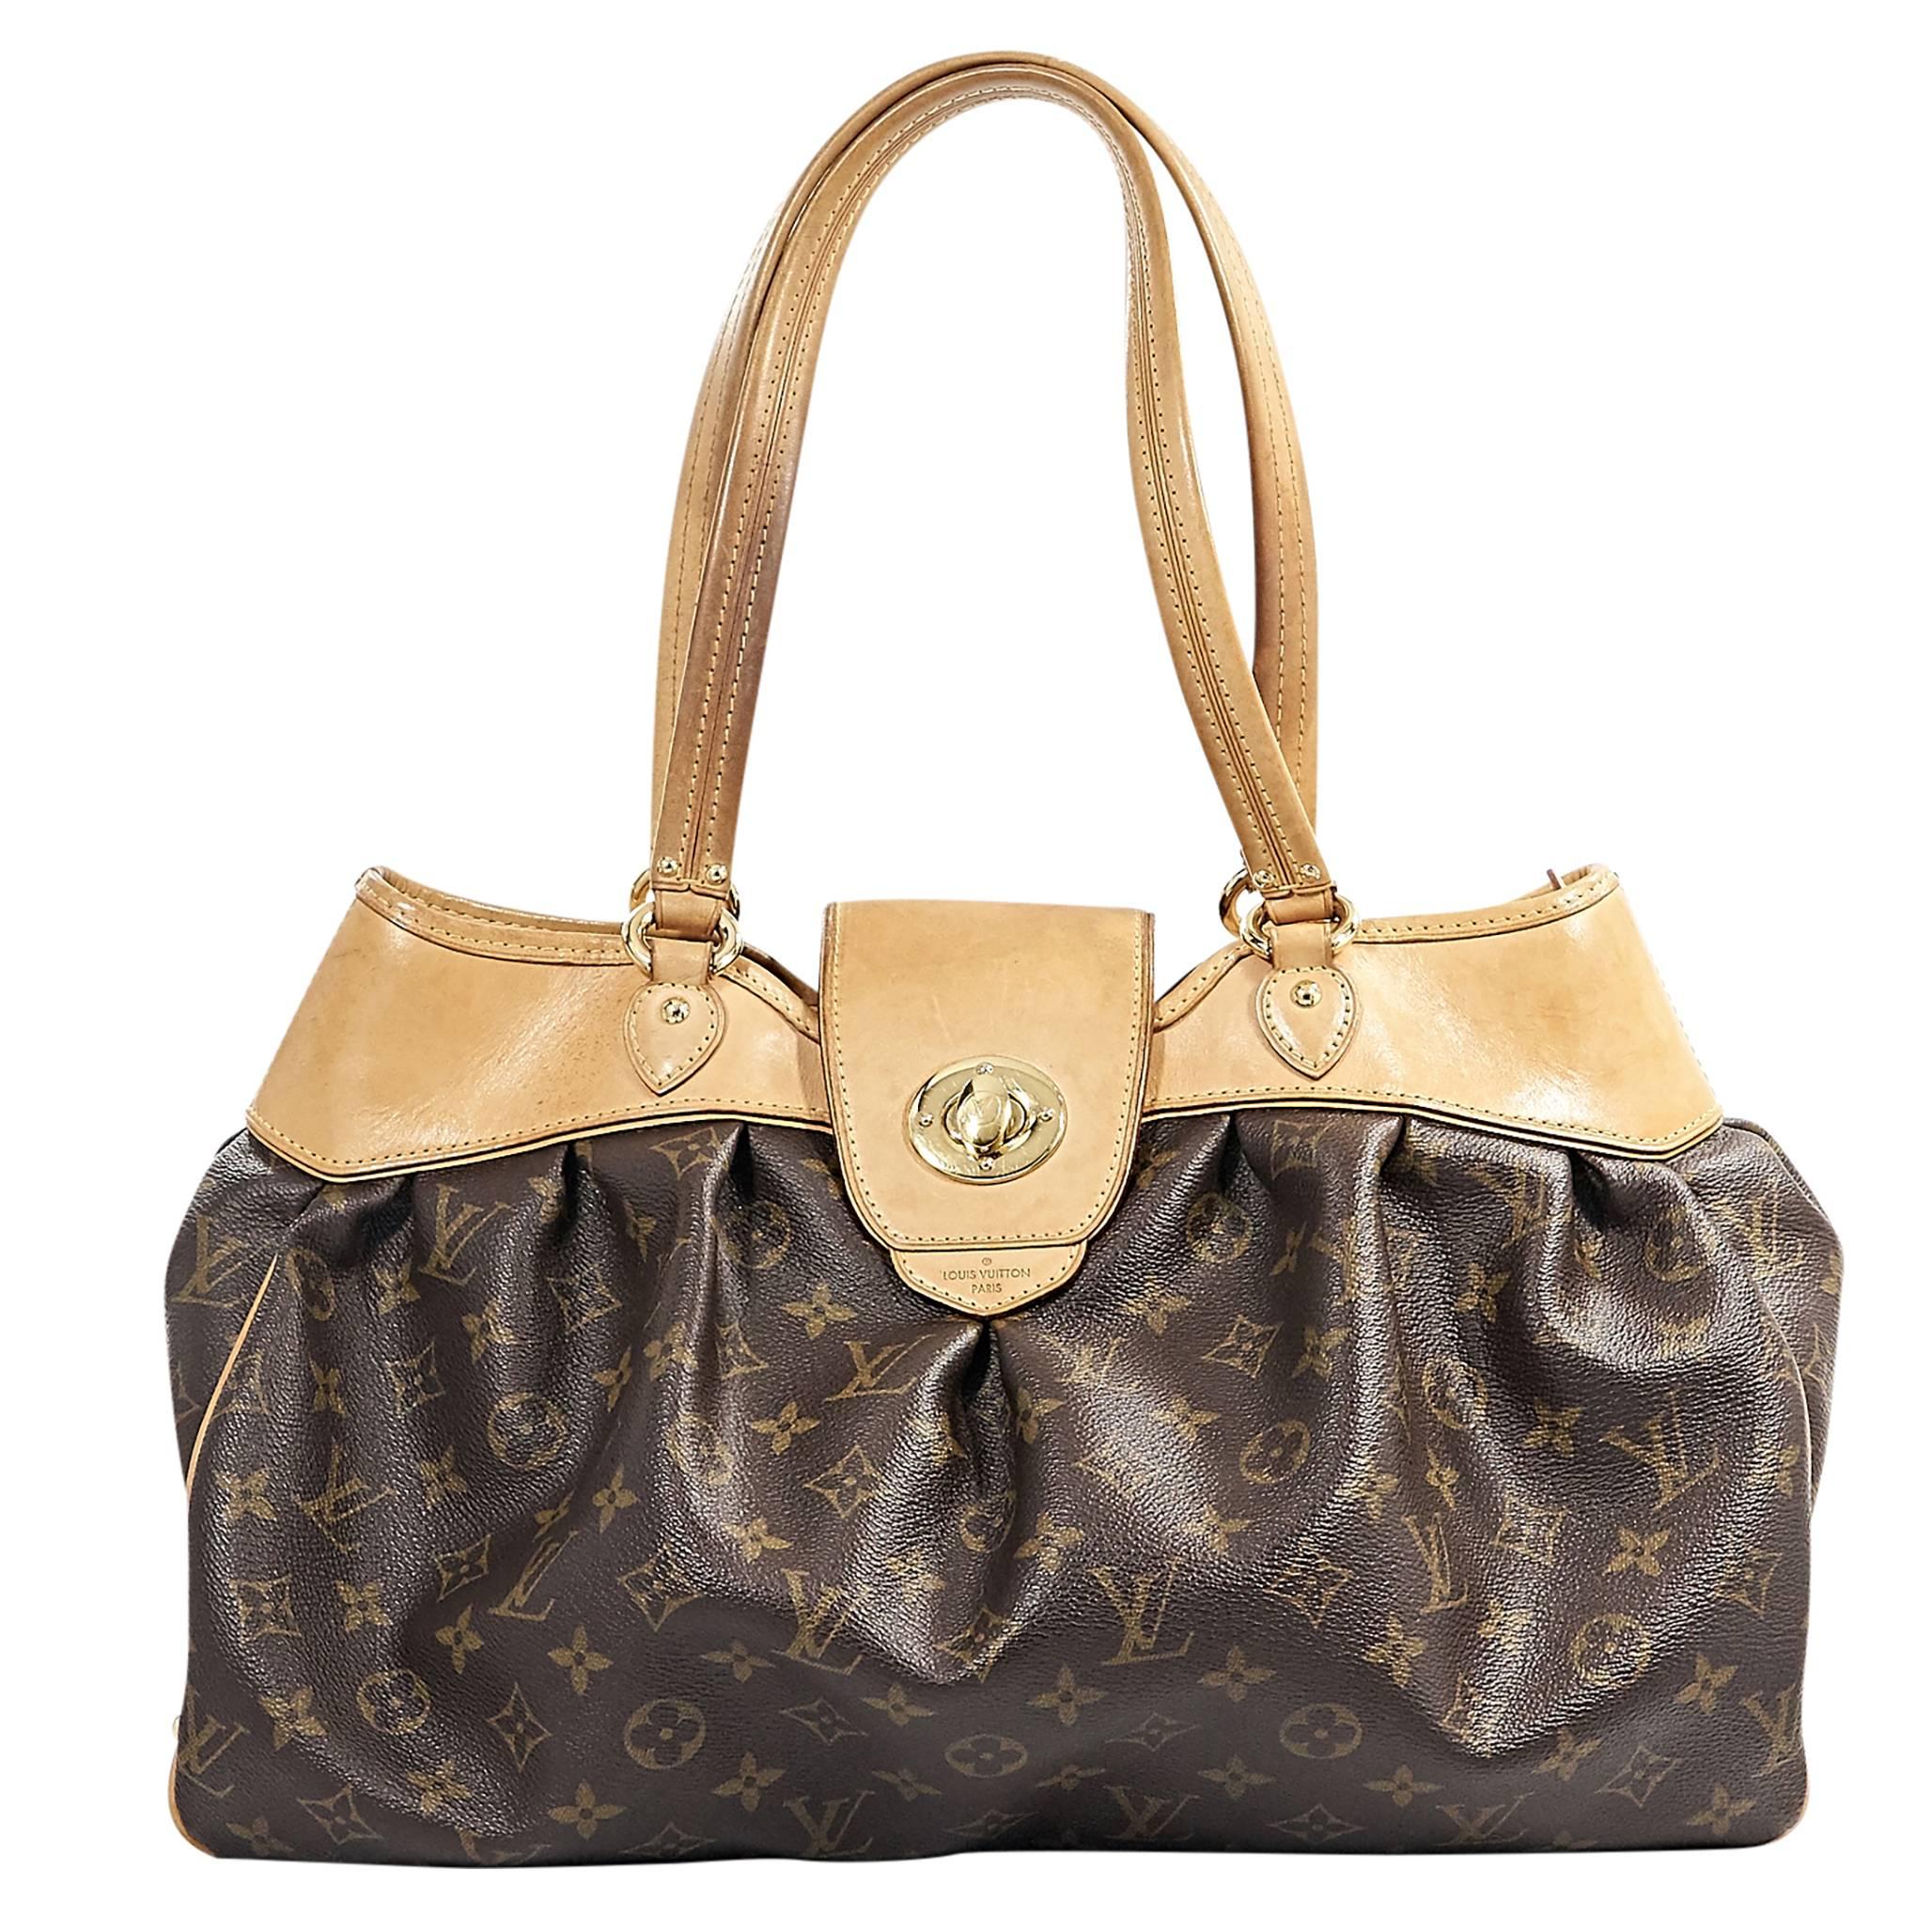 Louis Vuitton Bow Tie Bag - For Sale on 1stDibs